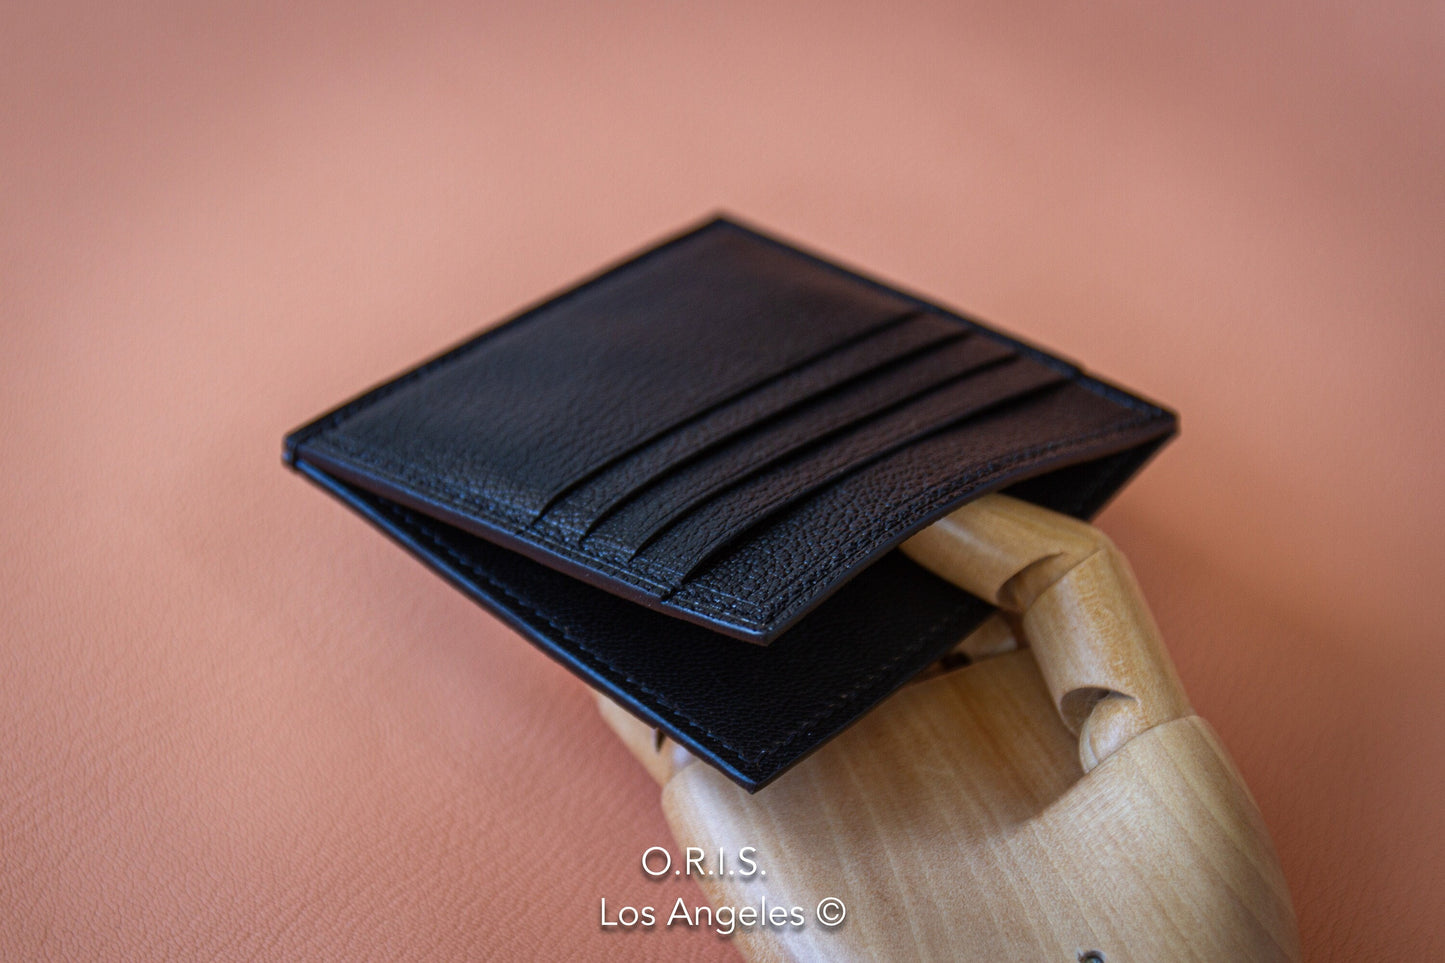 Card Holder - Luxury All Wallets and Small Leather Goods - Wallets